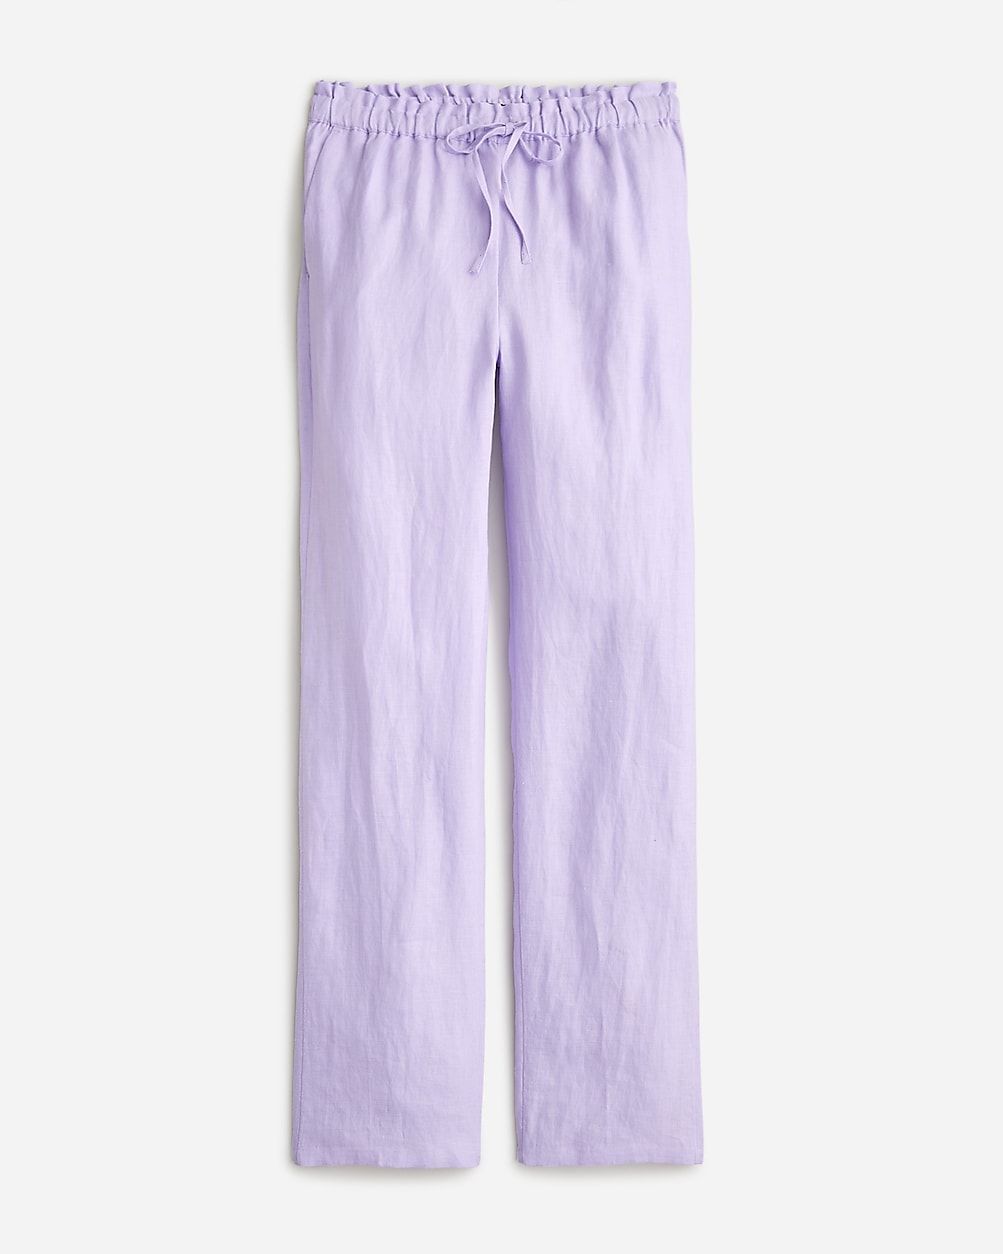 Tall Soleil pant in linen | J.Crew US